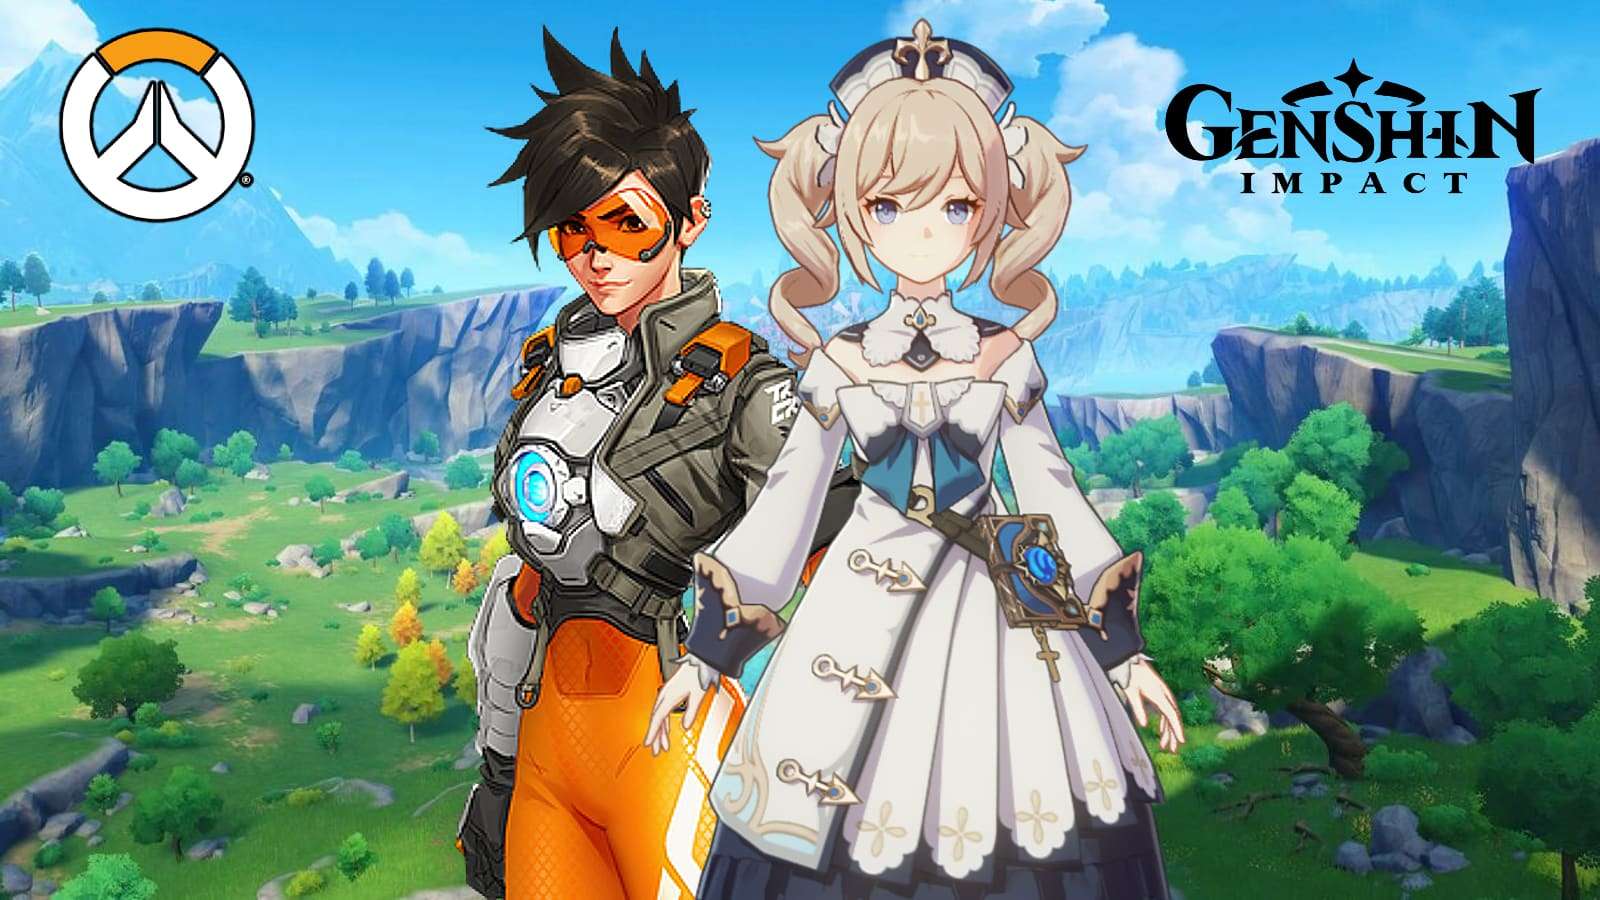 overwatch tracer and genshin impact barbara crossover tevyat background